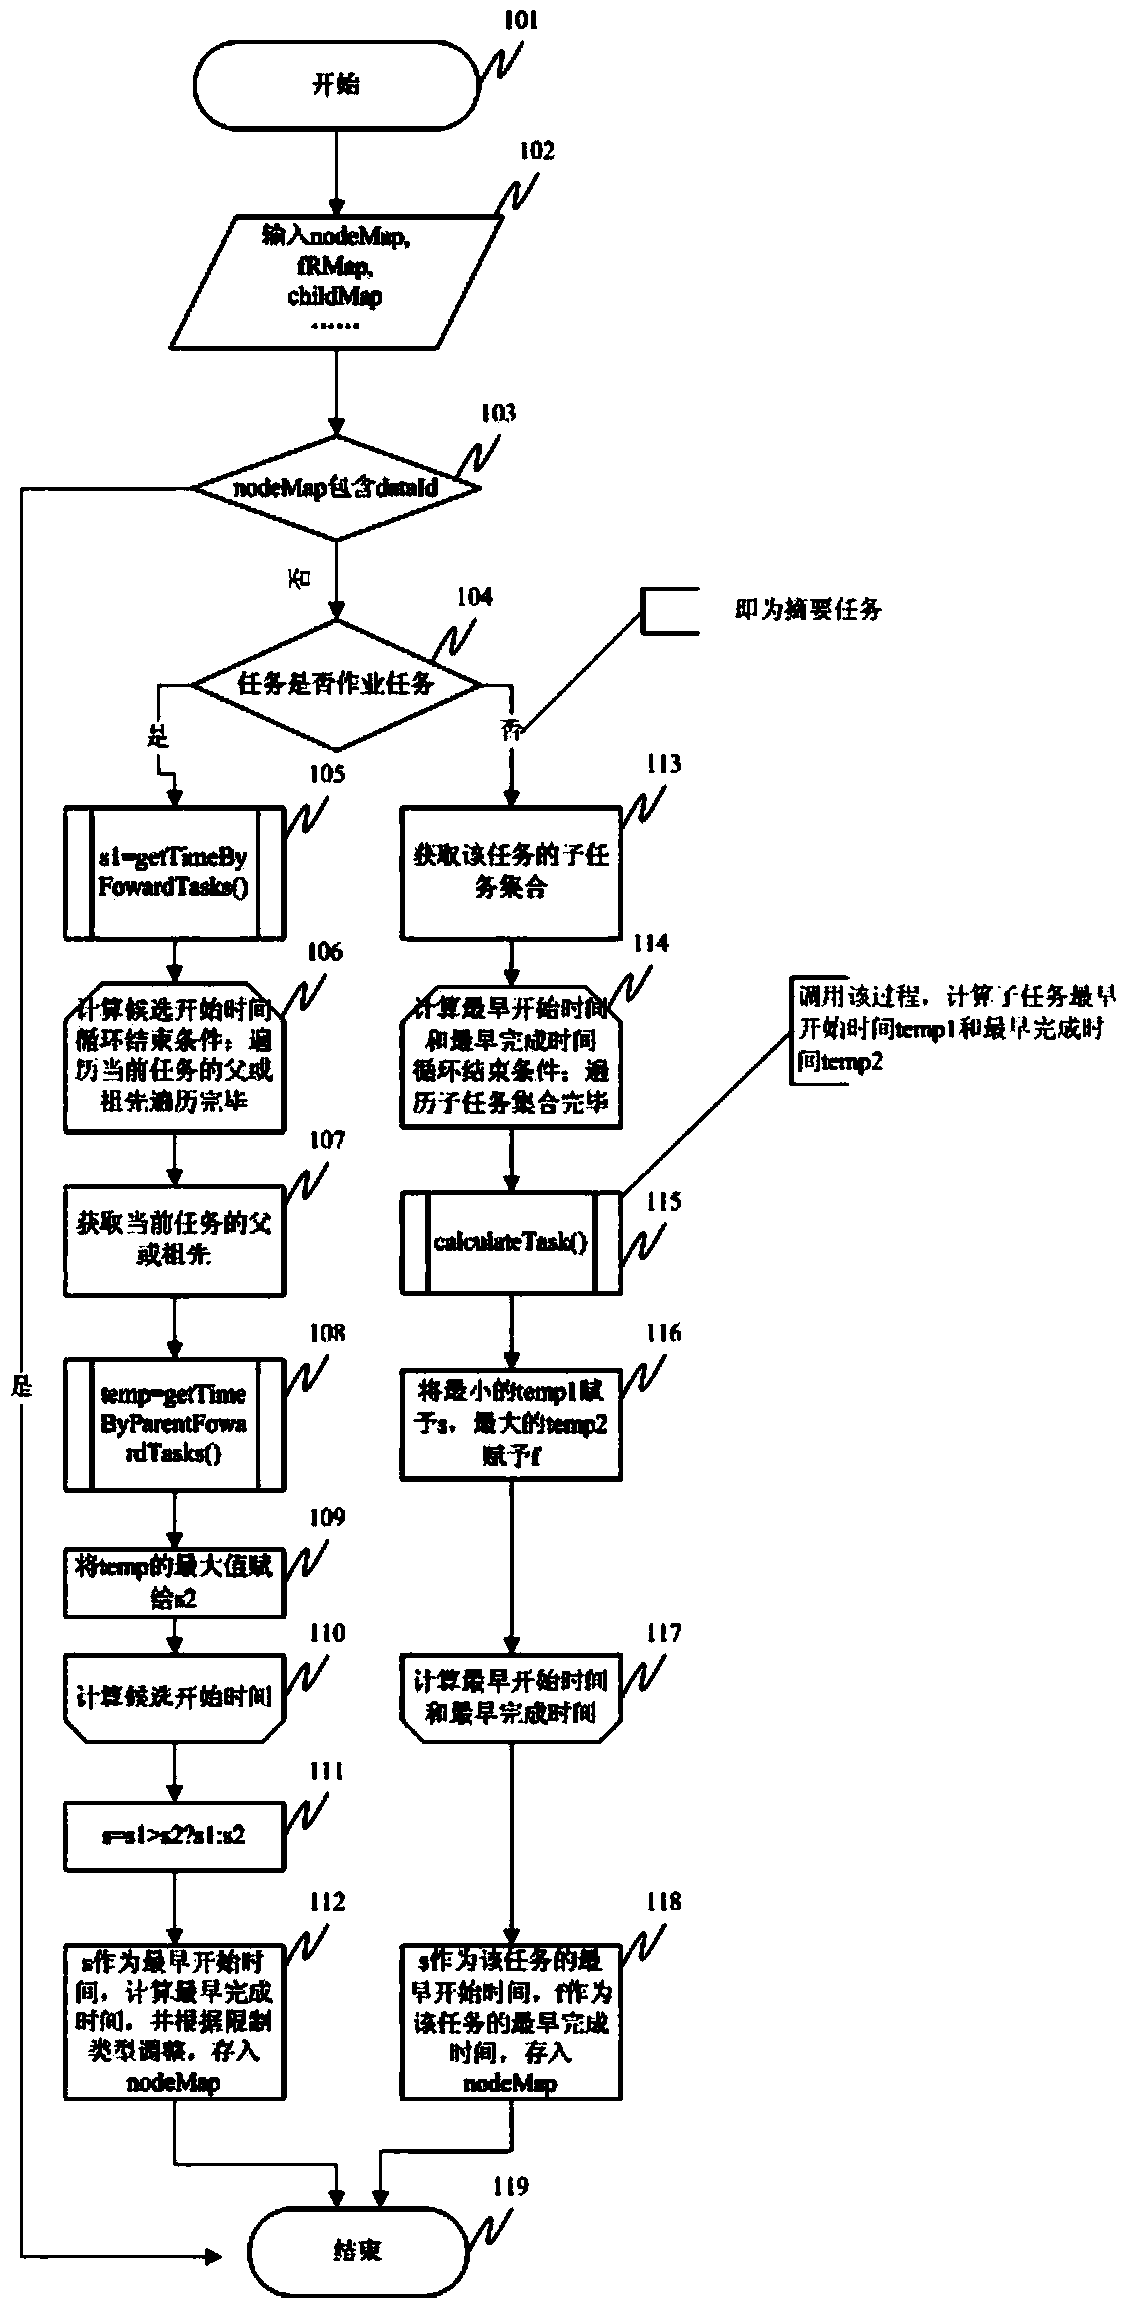 Multi-stage network plan based schedule calculation method and implementation of method